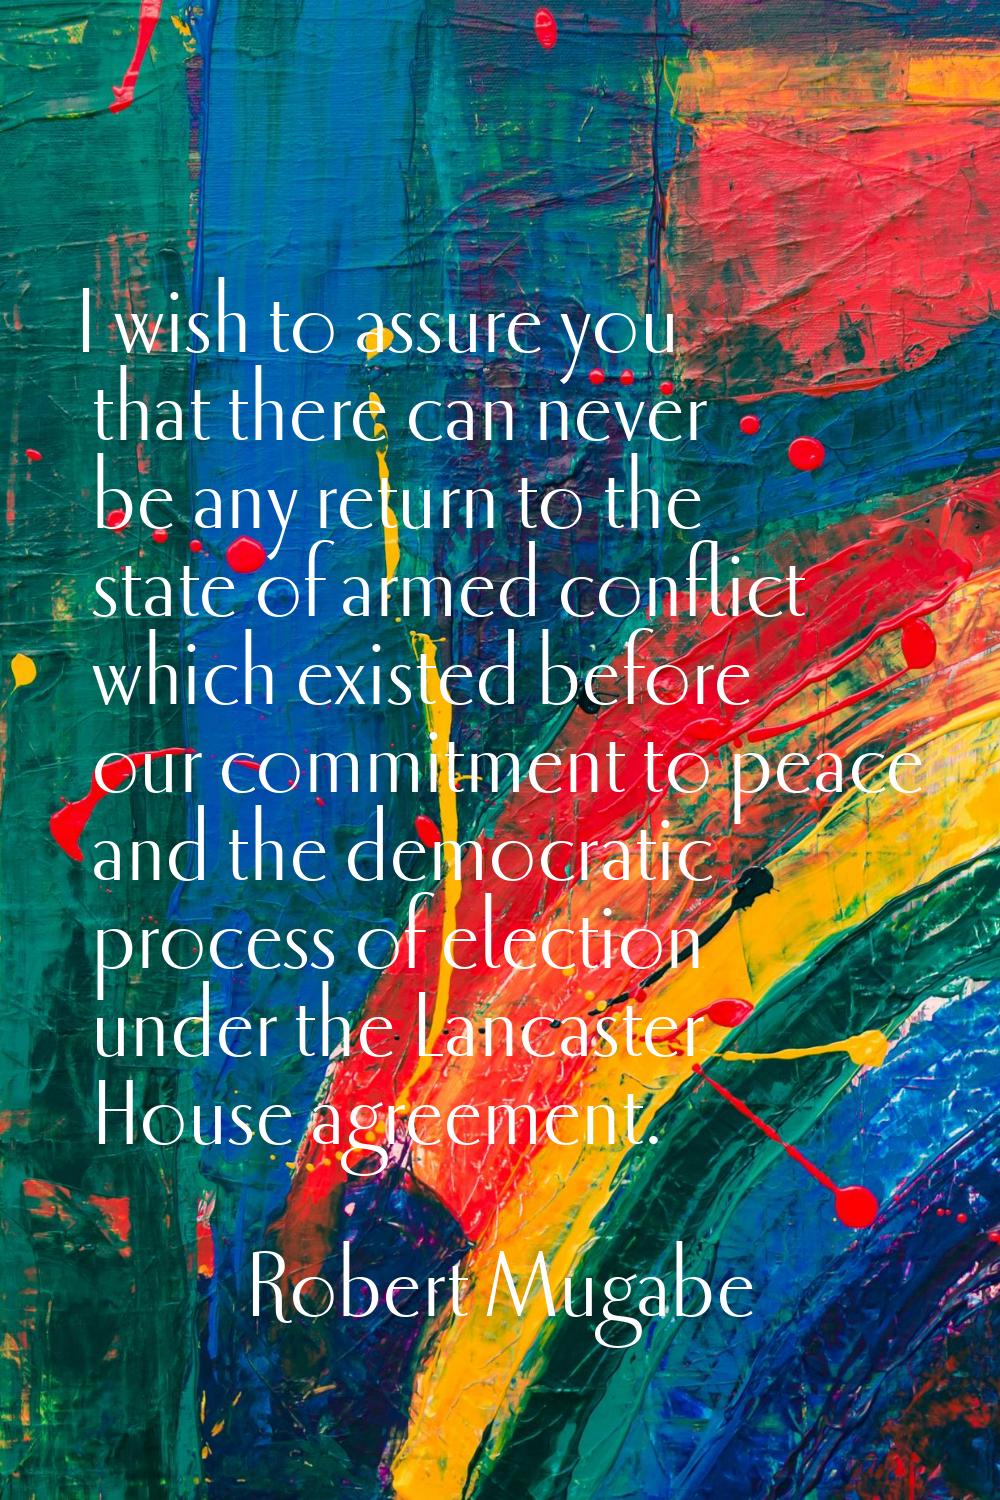 I wish to assure you that there can never be any return to the state of armed conflict which existe